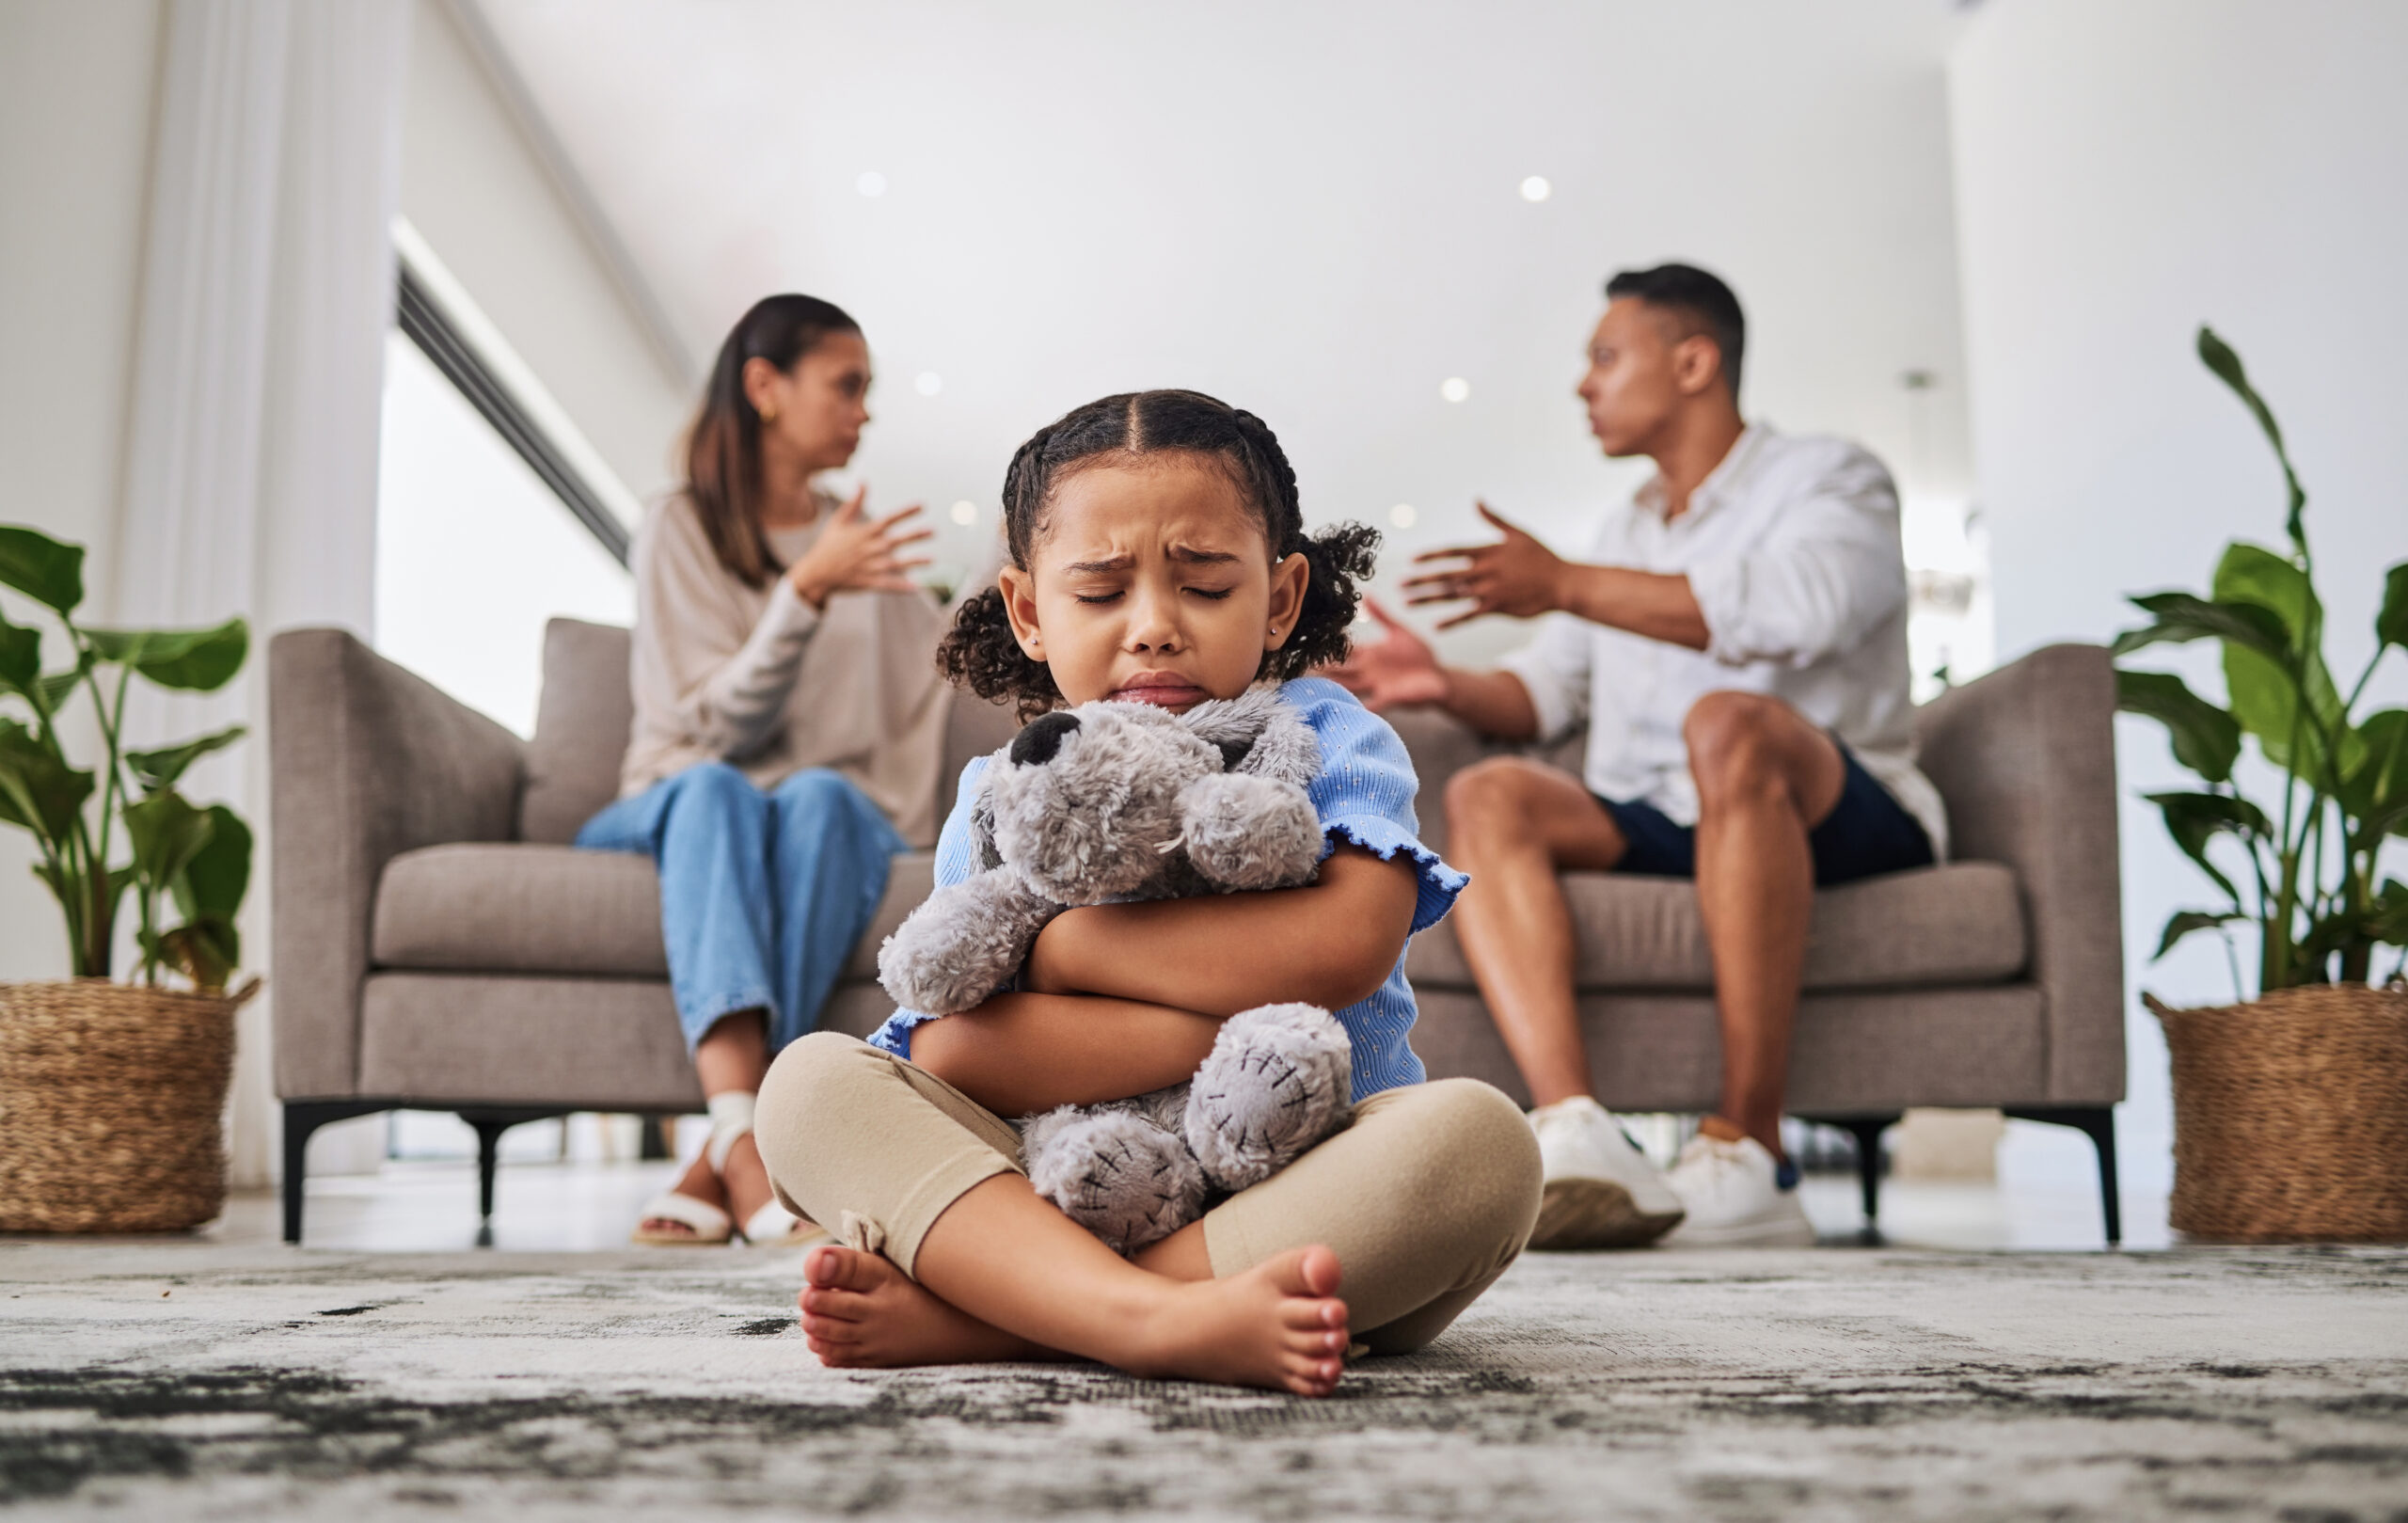 Co-Parenting with an Unhealthy Spouse